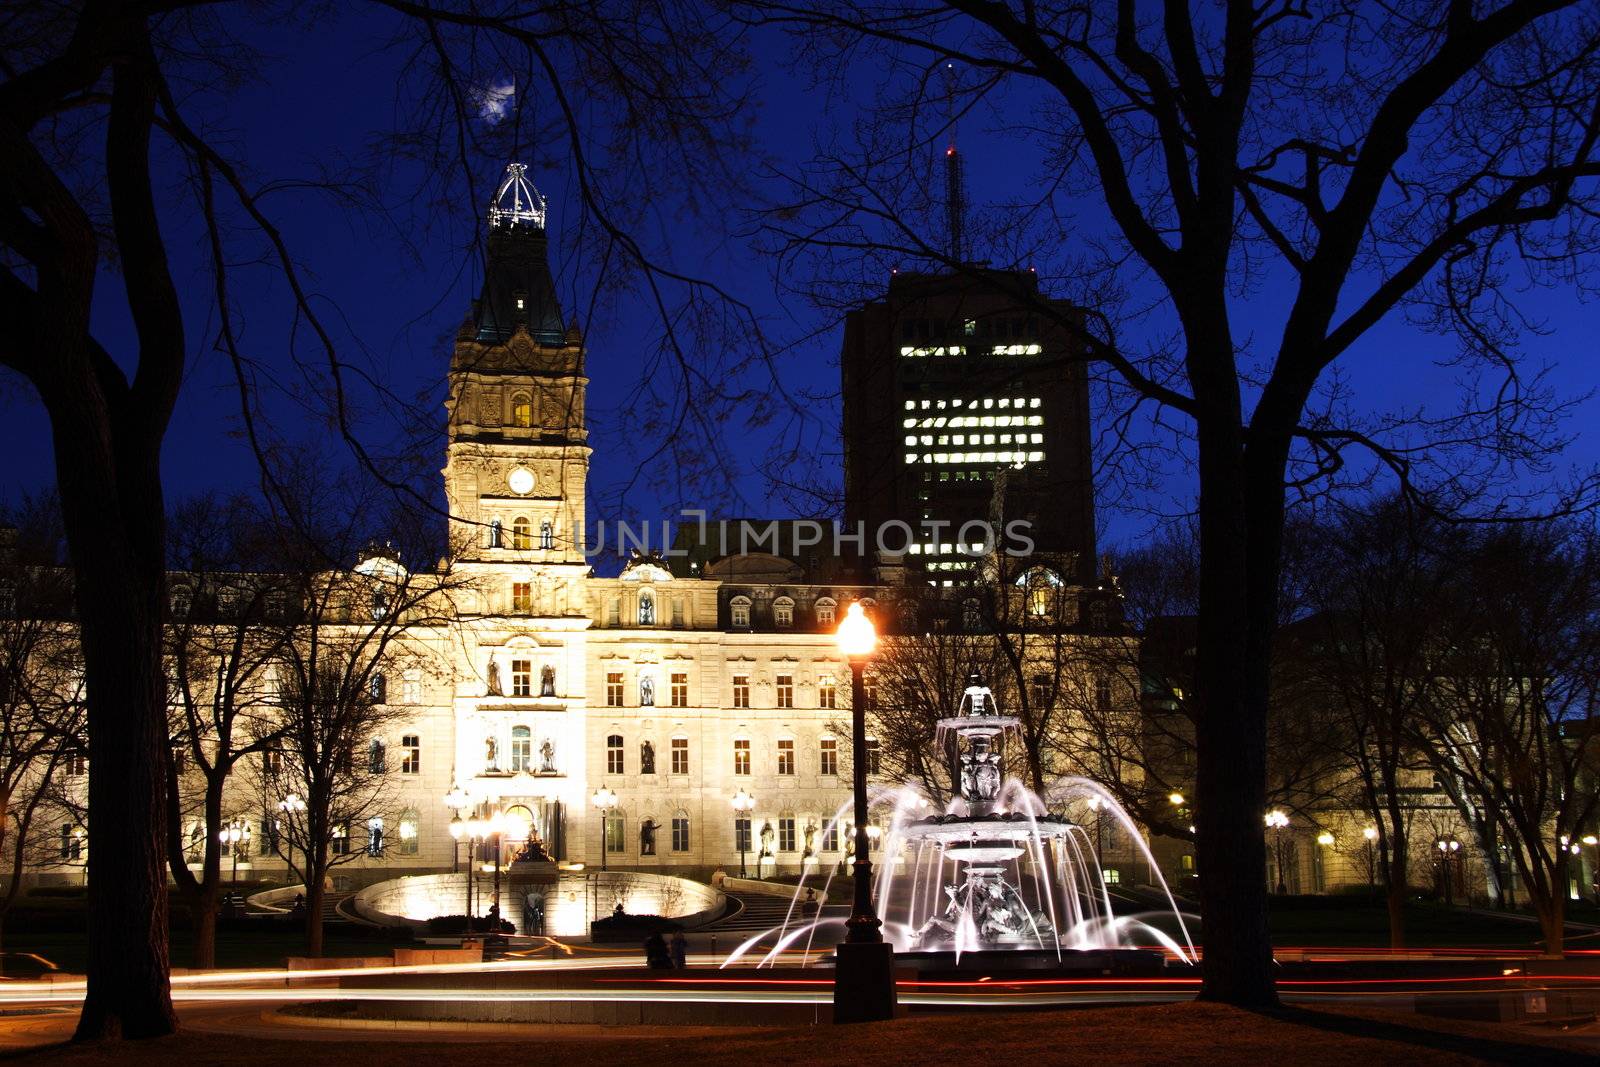 Typical night scene from Quebec City: Quebec parliament building (H�tel du Parlement) and Fontaine de Tourny. Long exposure.